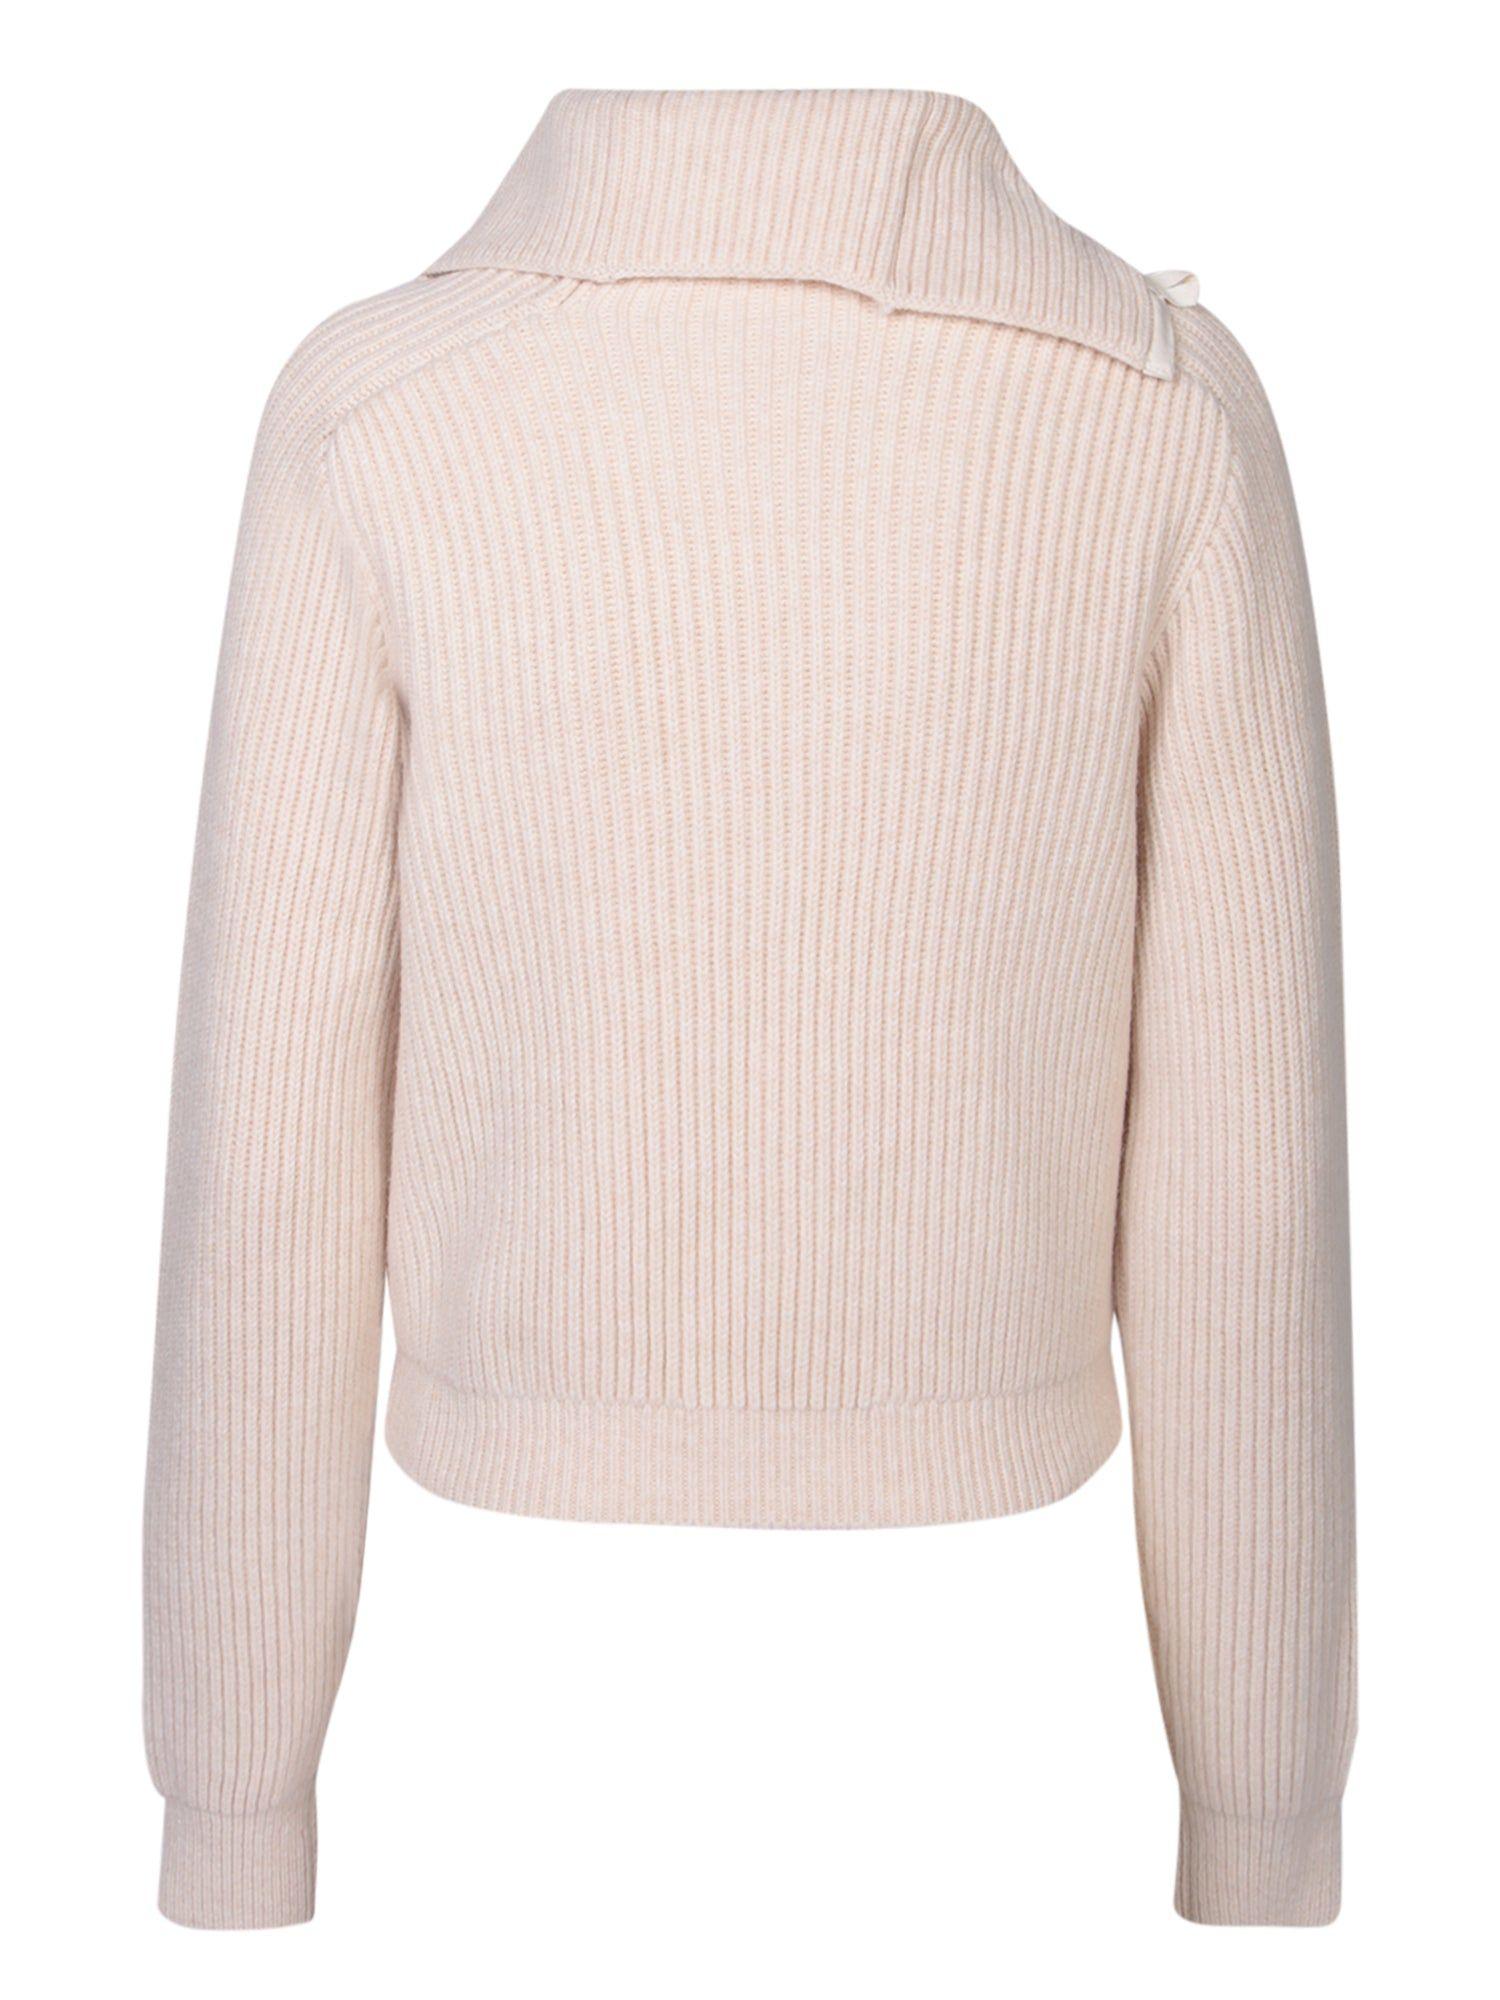 Jacquemus Knitwear in White | Lyst